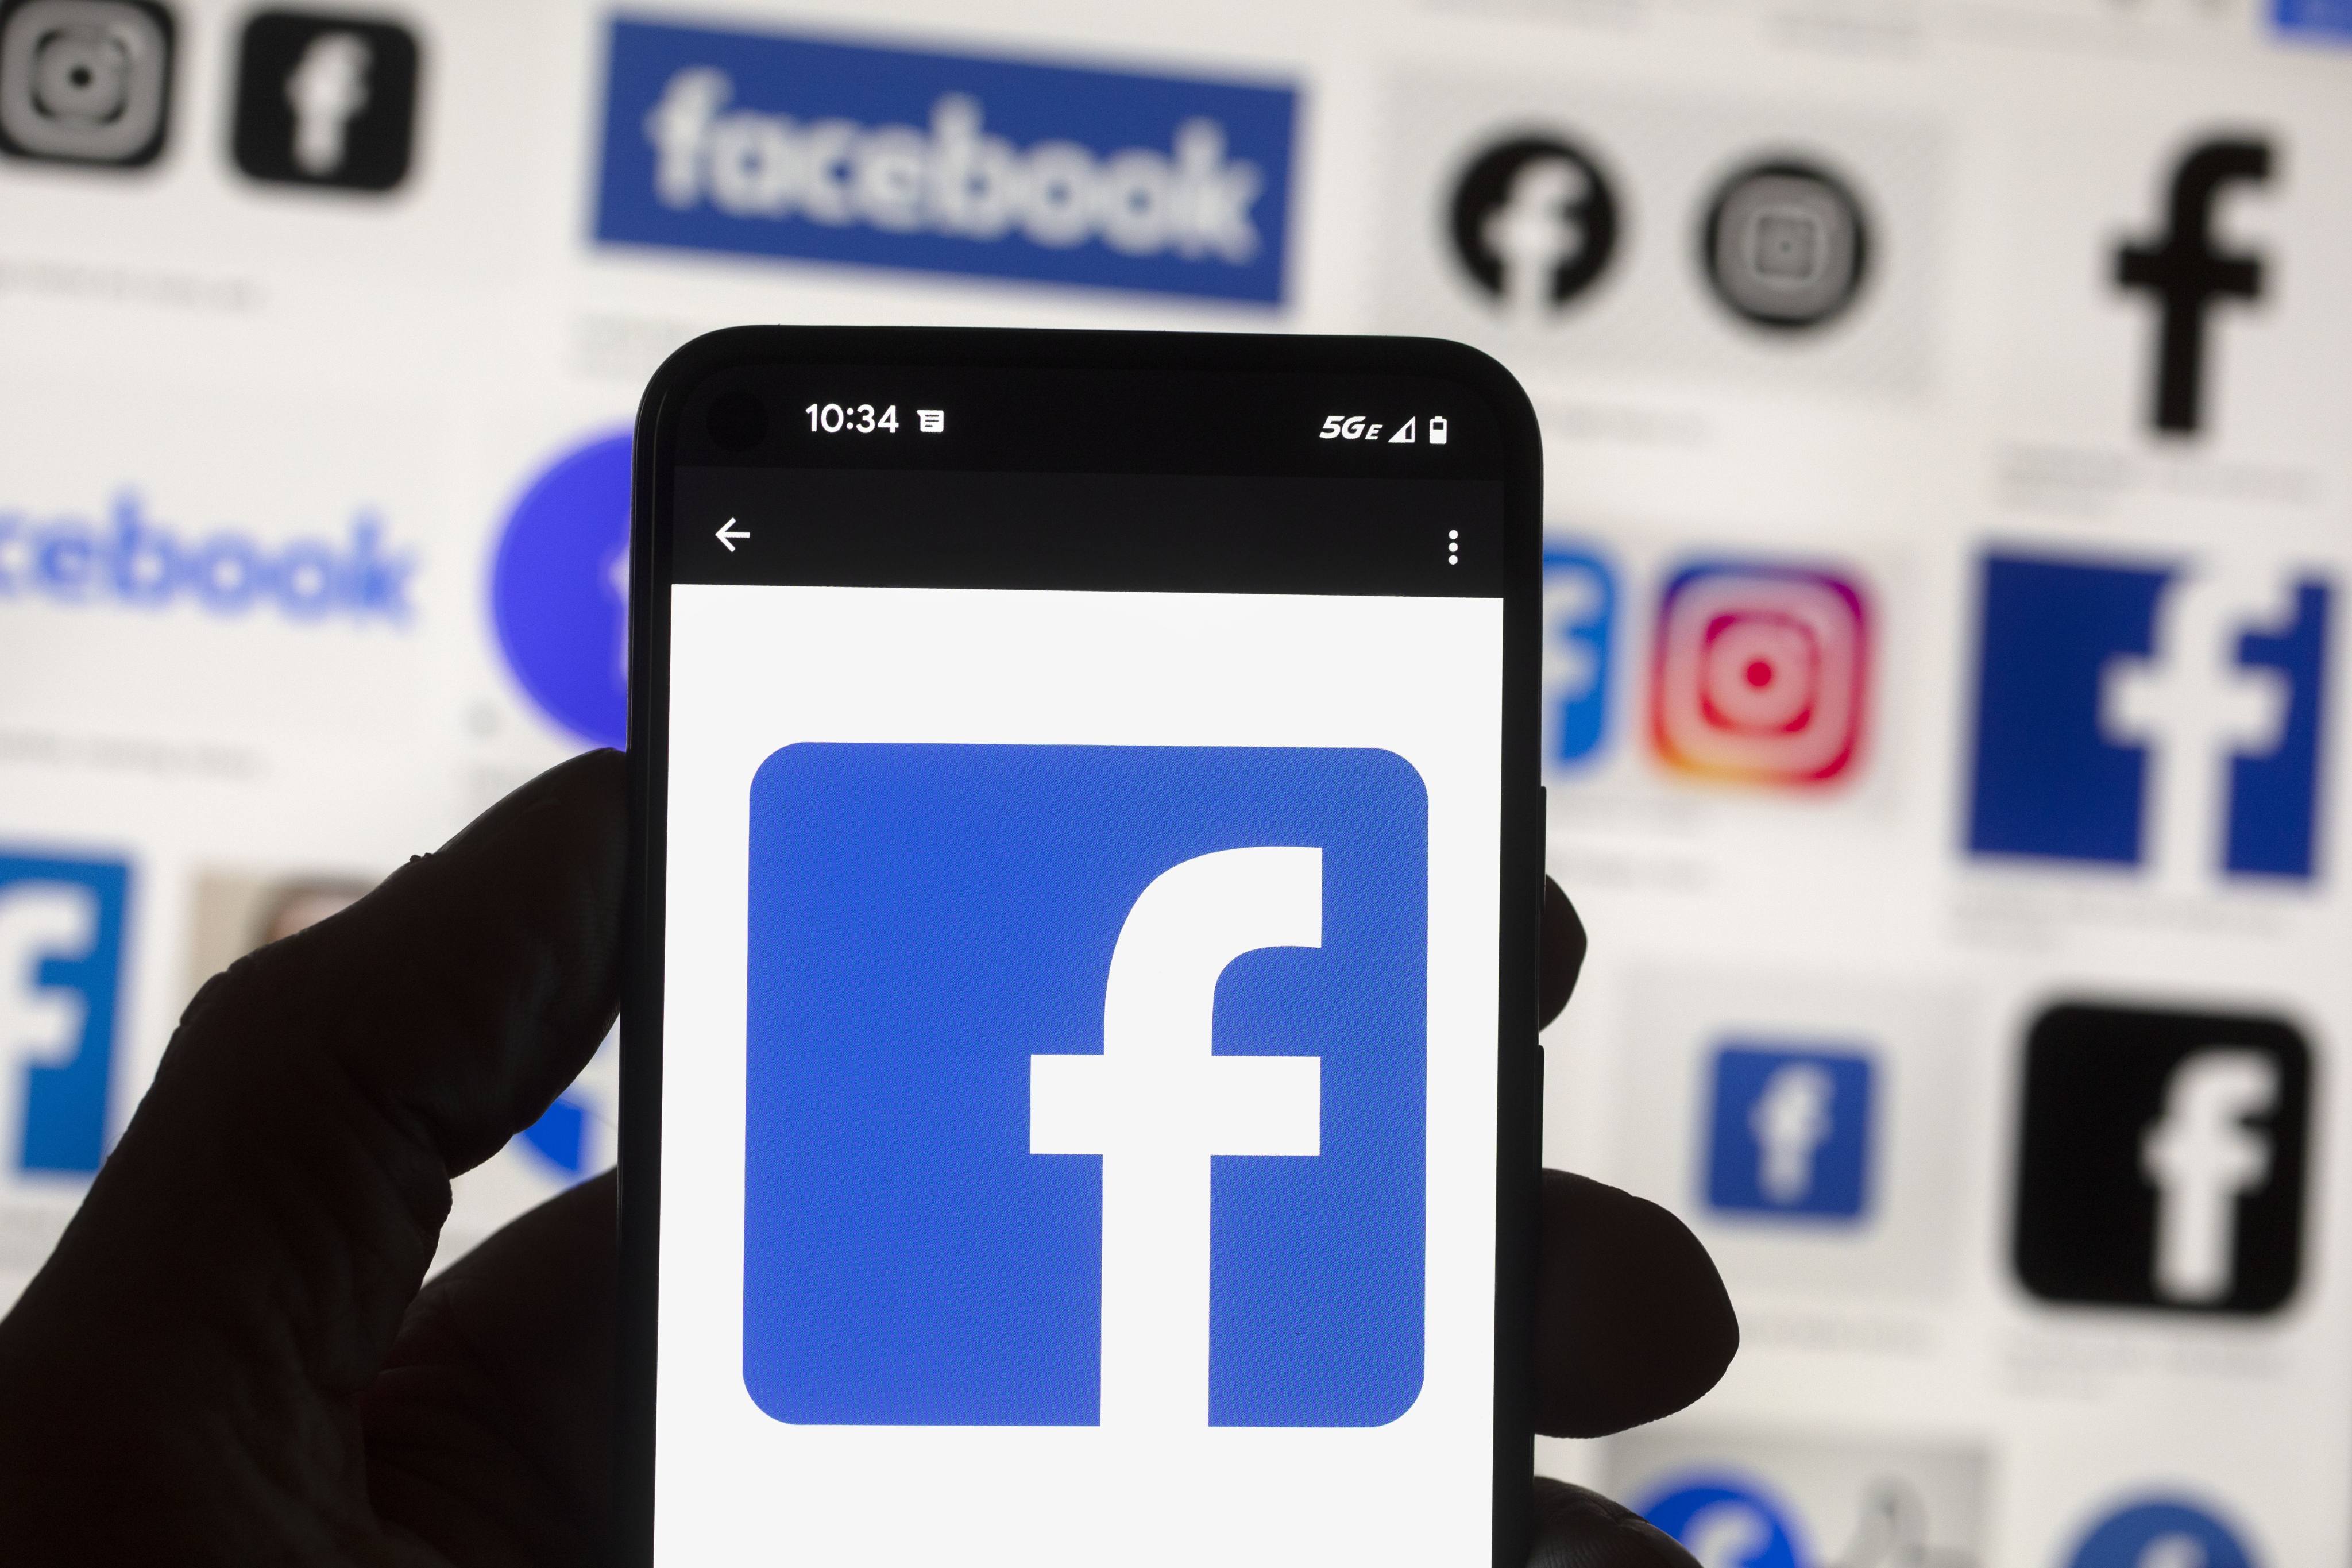 Facebook, Instagram and WhatsApp are all owned and operated by parent company Meta, which has agreed to work with Malaysian police to tackle online scams and remove “undesirable content” from its platforms. Photo: AP